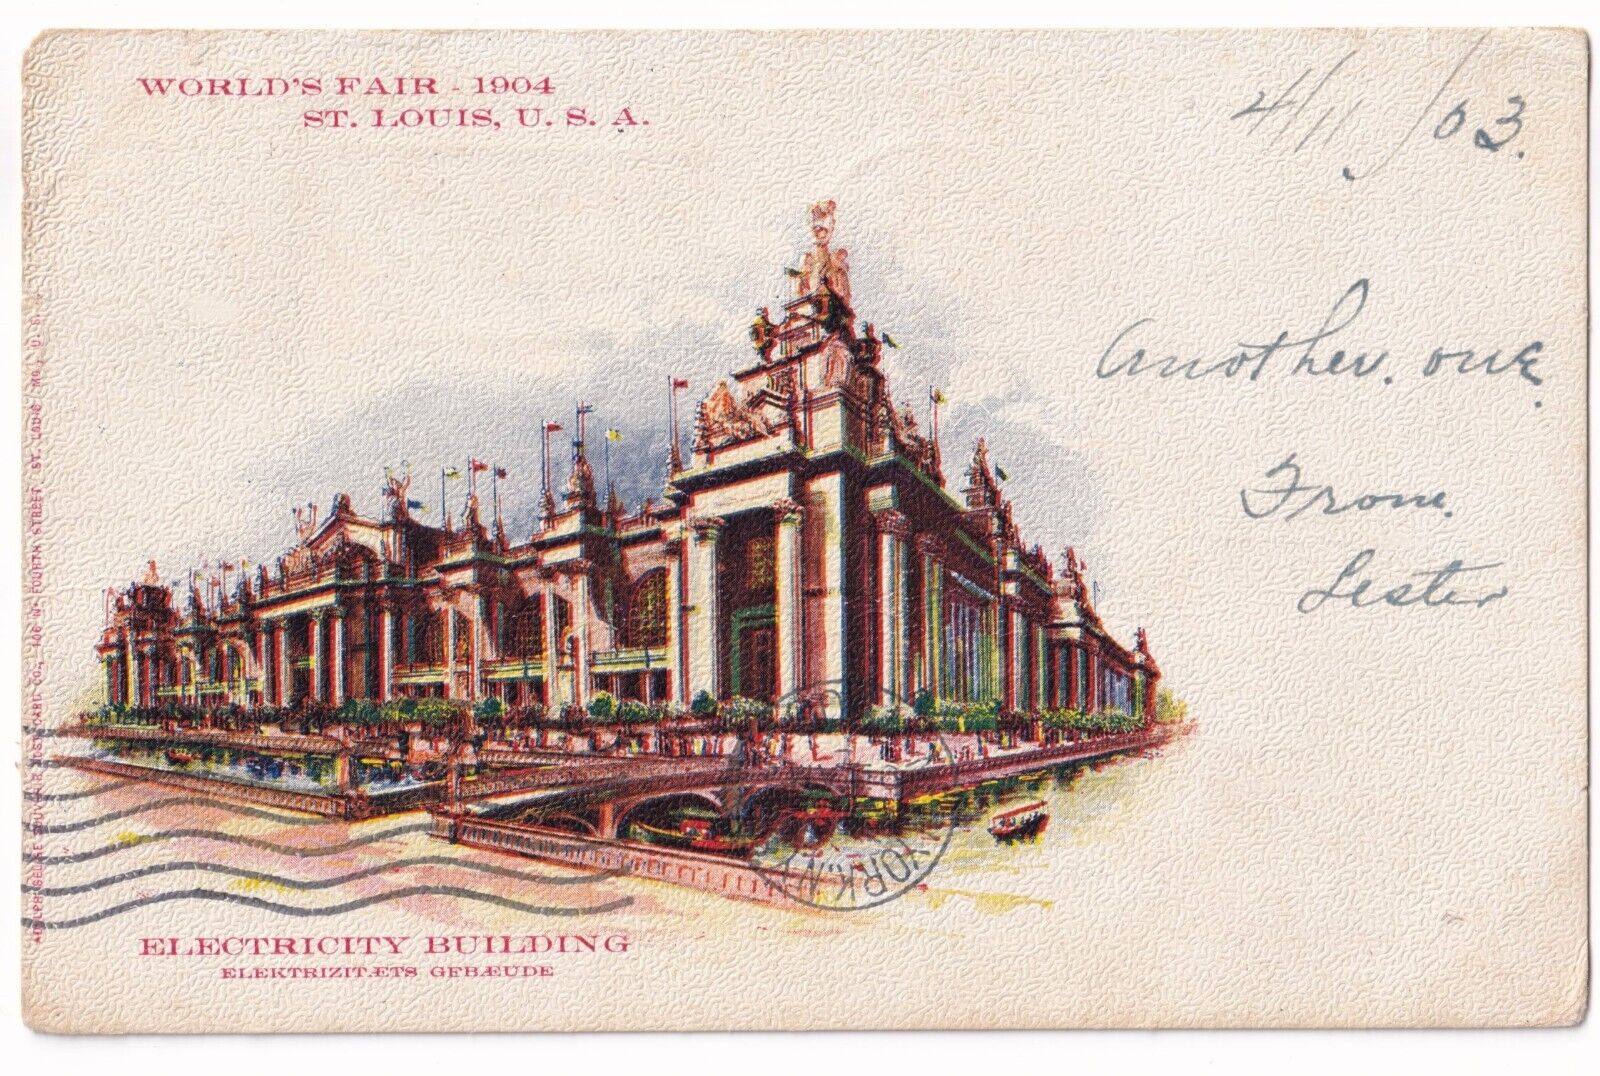 Post Card World's Fair 1904 St. Louis Electricity Building posted 1903